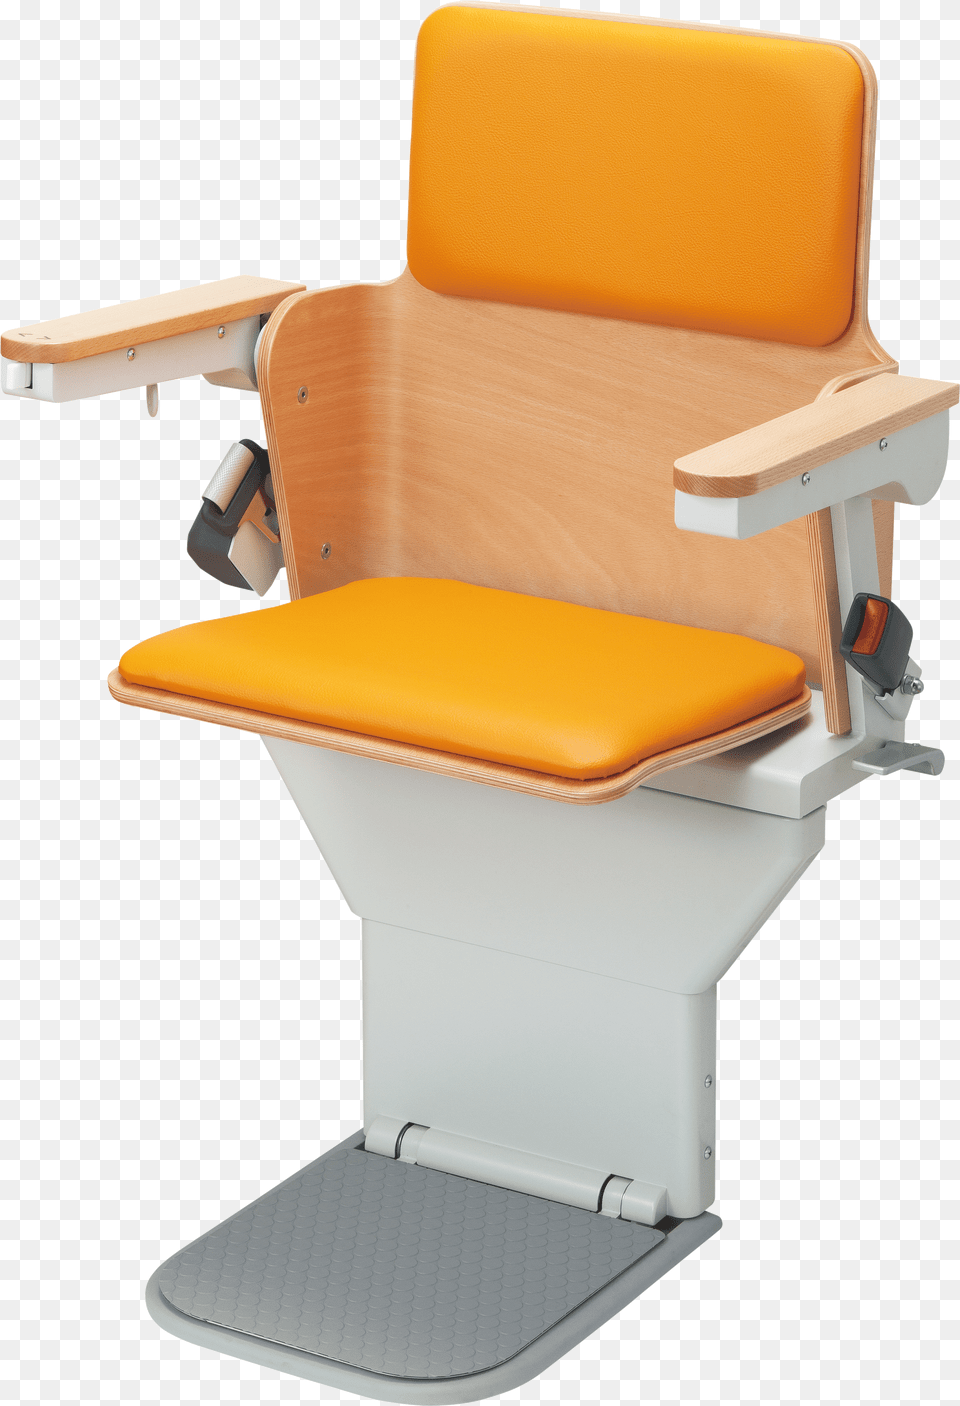 Stair Lift, Cushion, Furniture, Home Decor, Chair Png Image